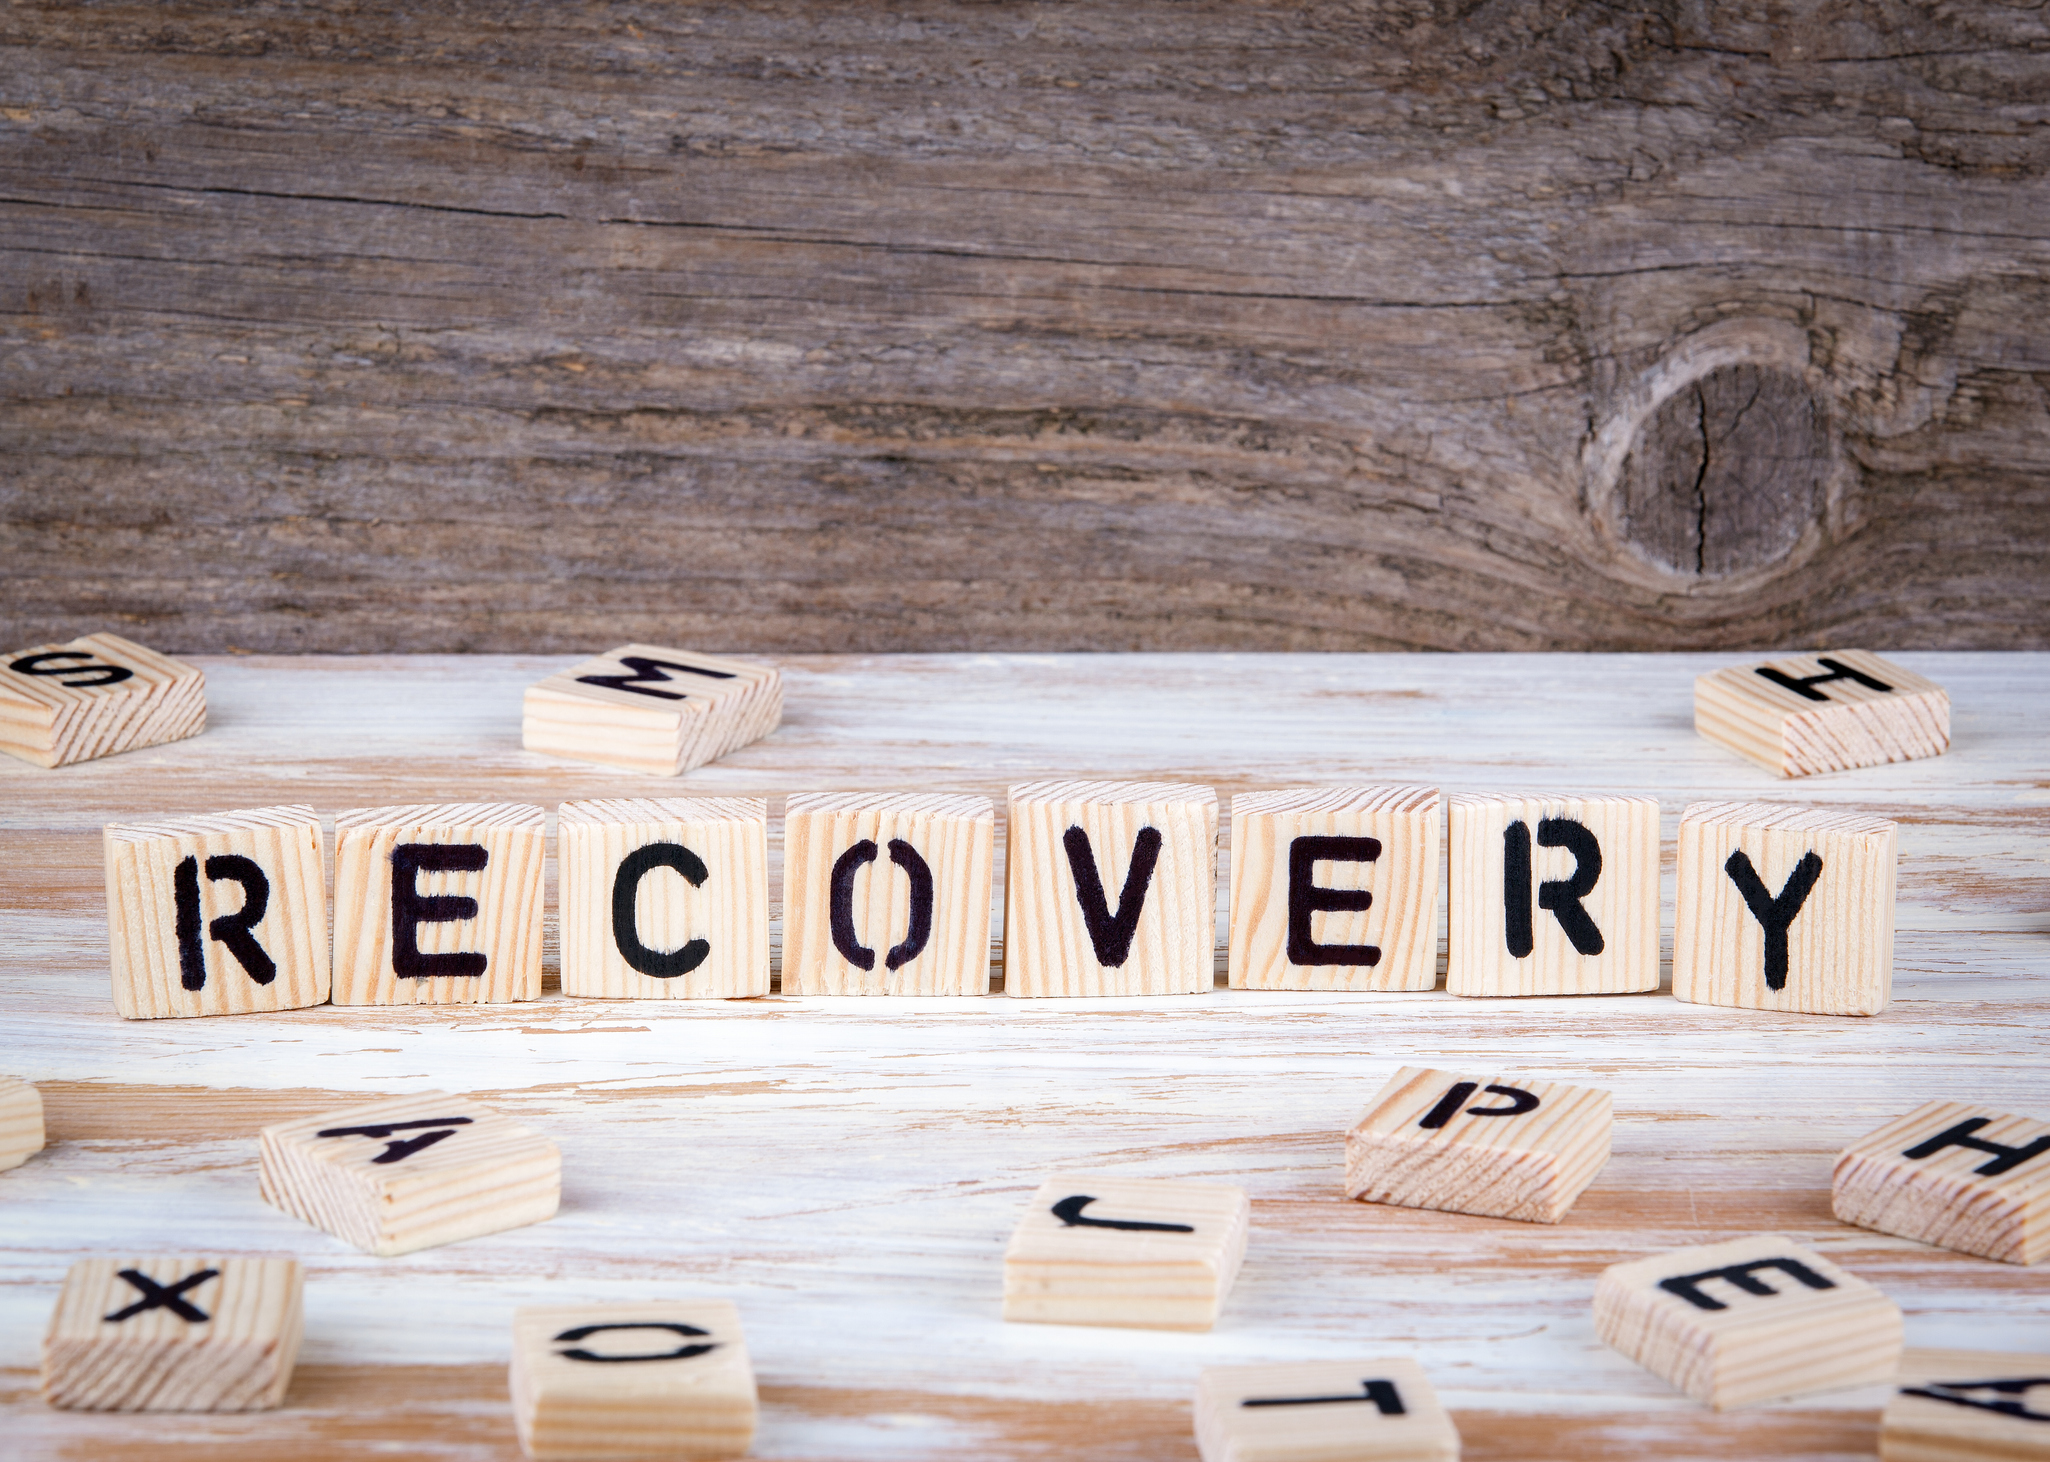 The X Factor in your Recovery is: YOU